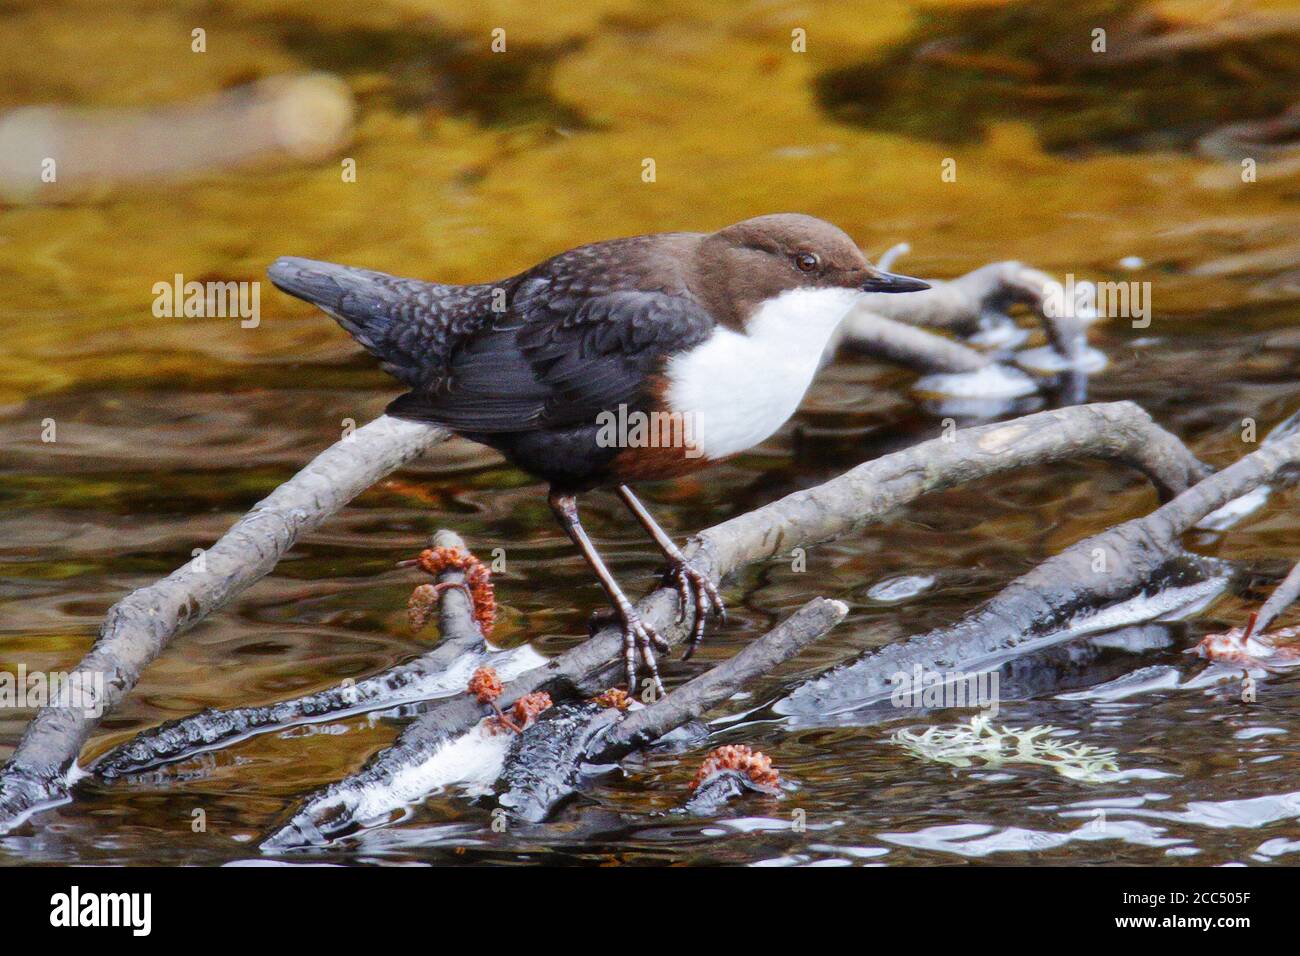 British White-throated Dipper (Cinclus cinclus gularis), subspecies of the eastern parts of Great Britain, United Kingdom, Scotland, Invernessshire Stock Photo